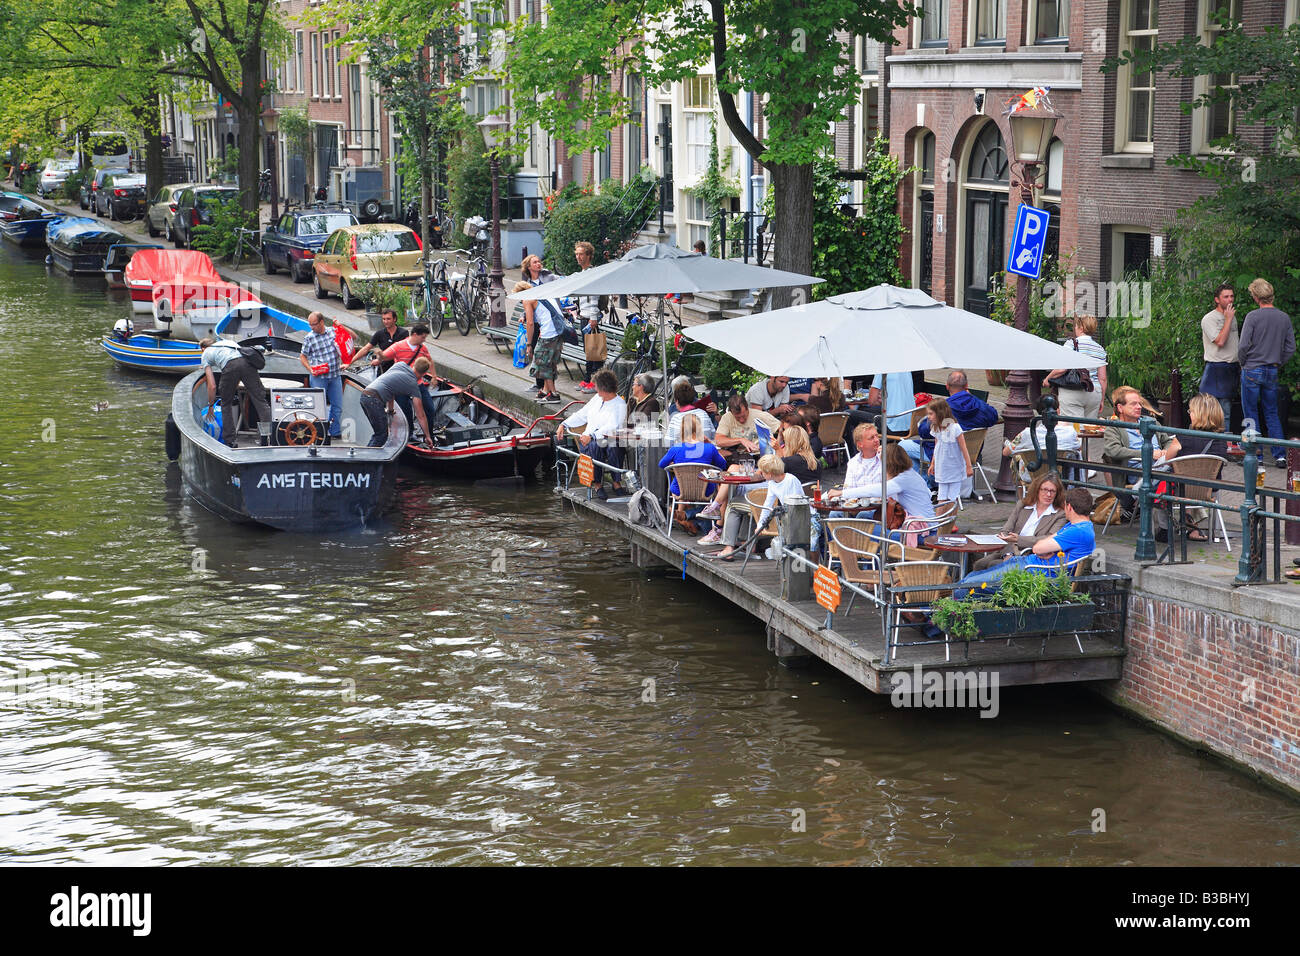 People eating and drinking besides a canal in Amsterdam, Holland Stock Photo